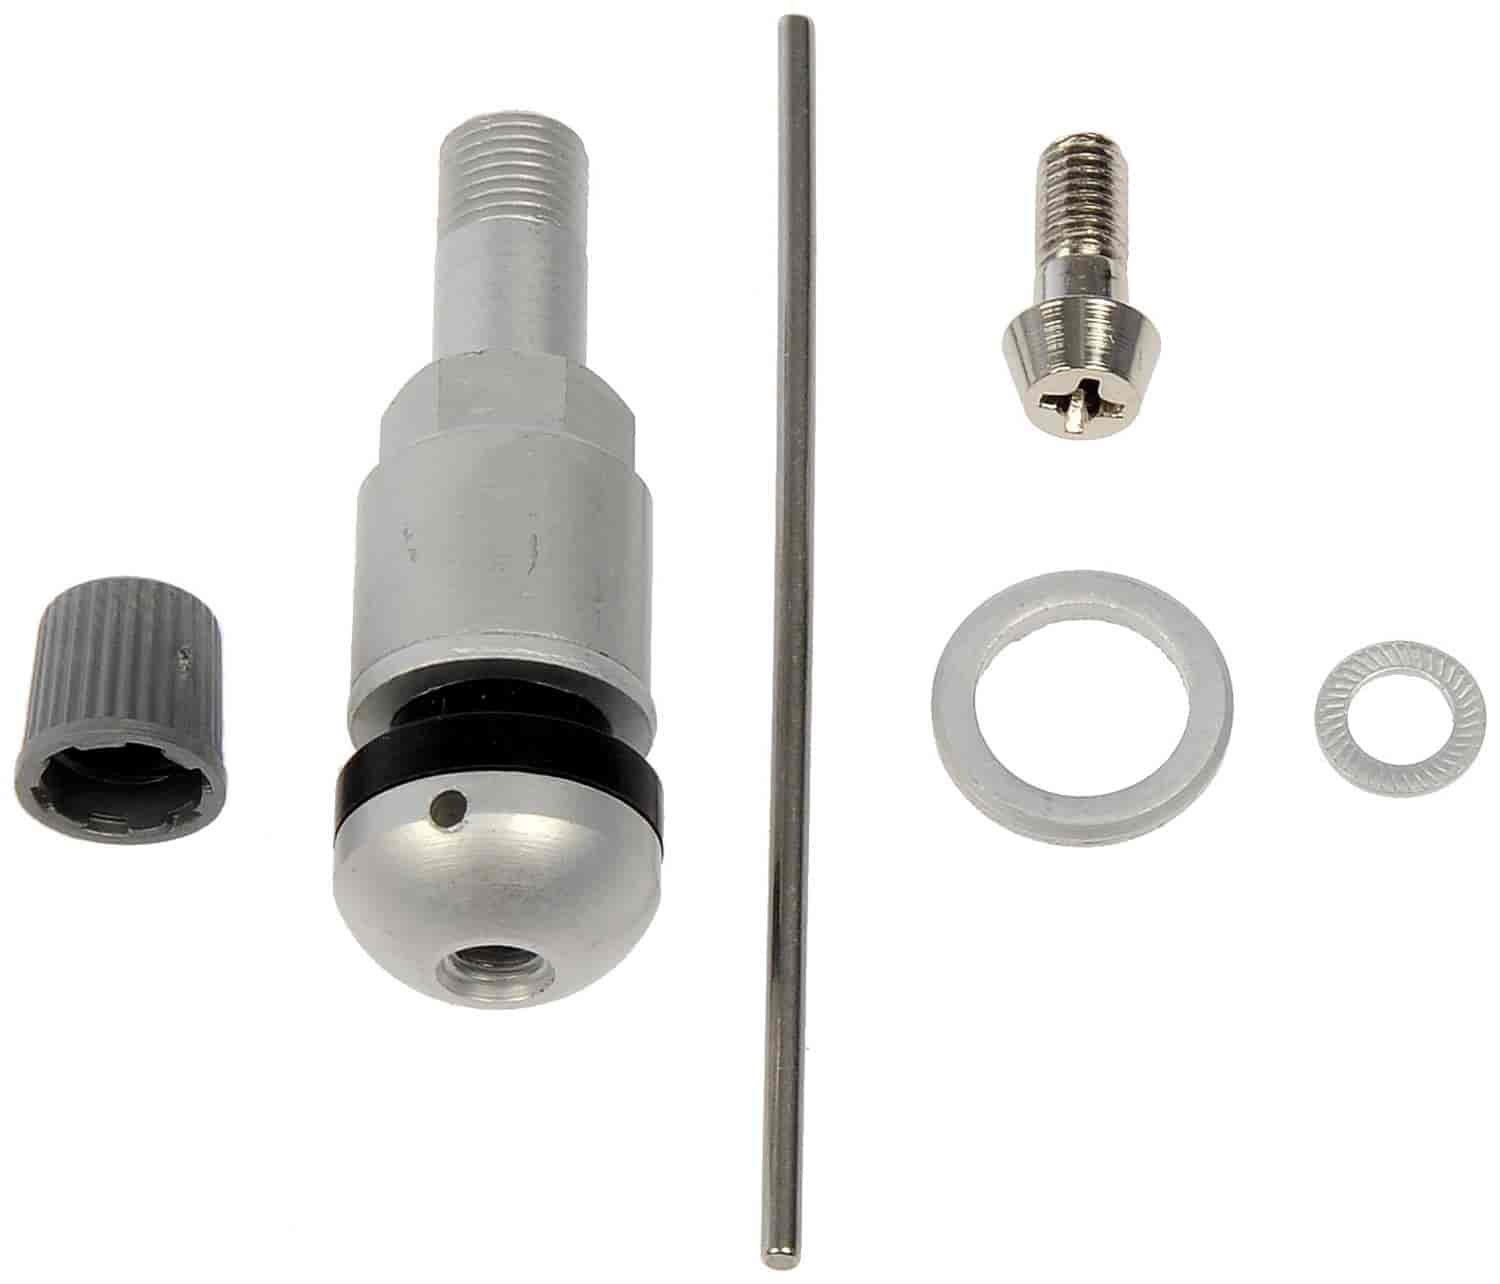 TPMS Service Kit - Replacement Aluminum Clamp-In Valve